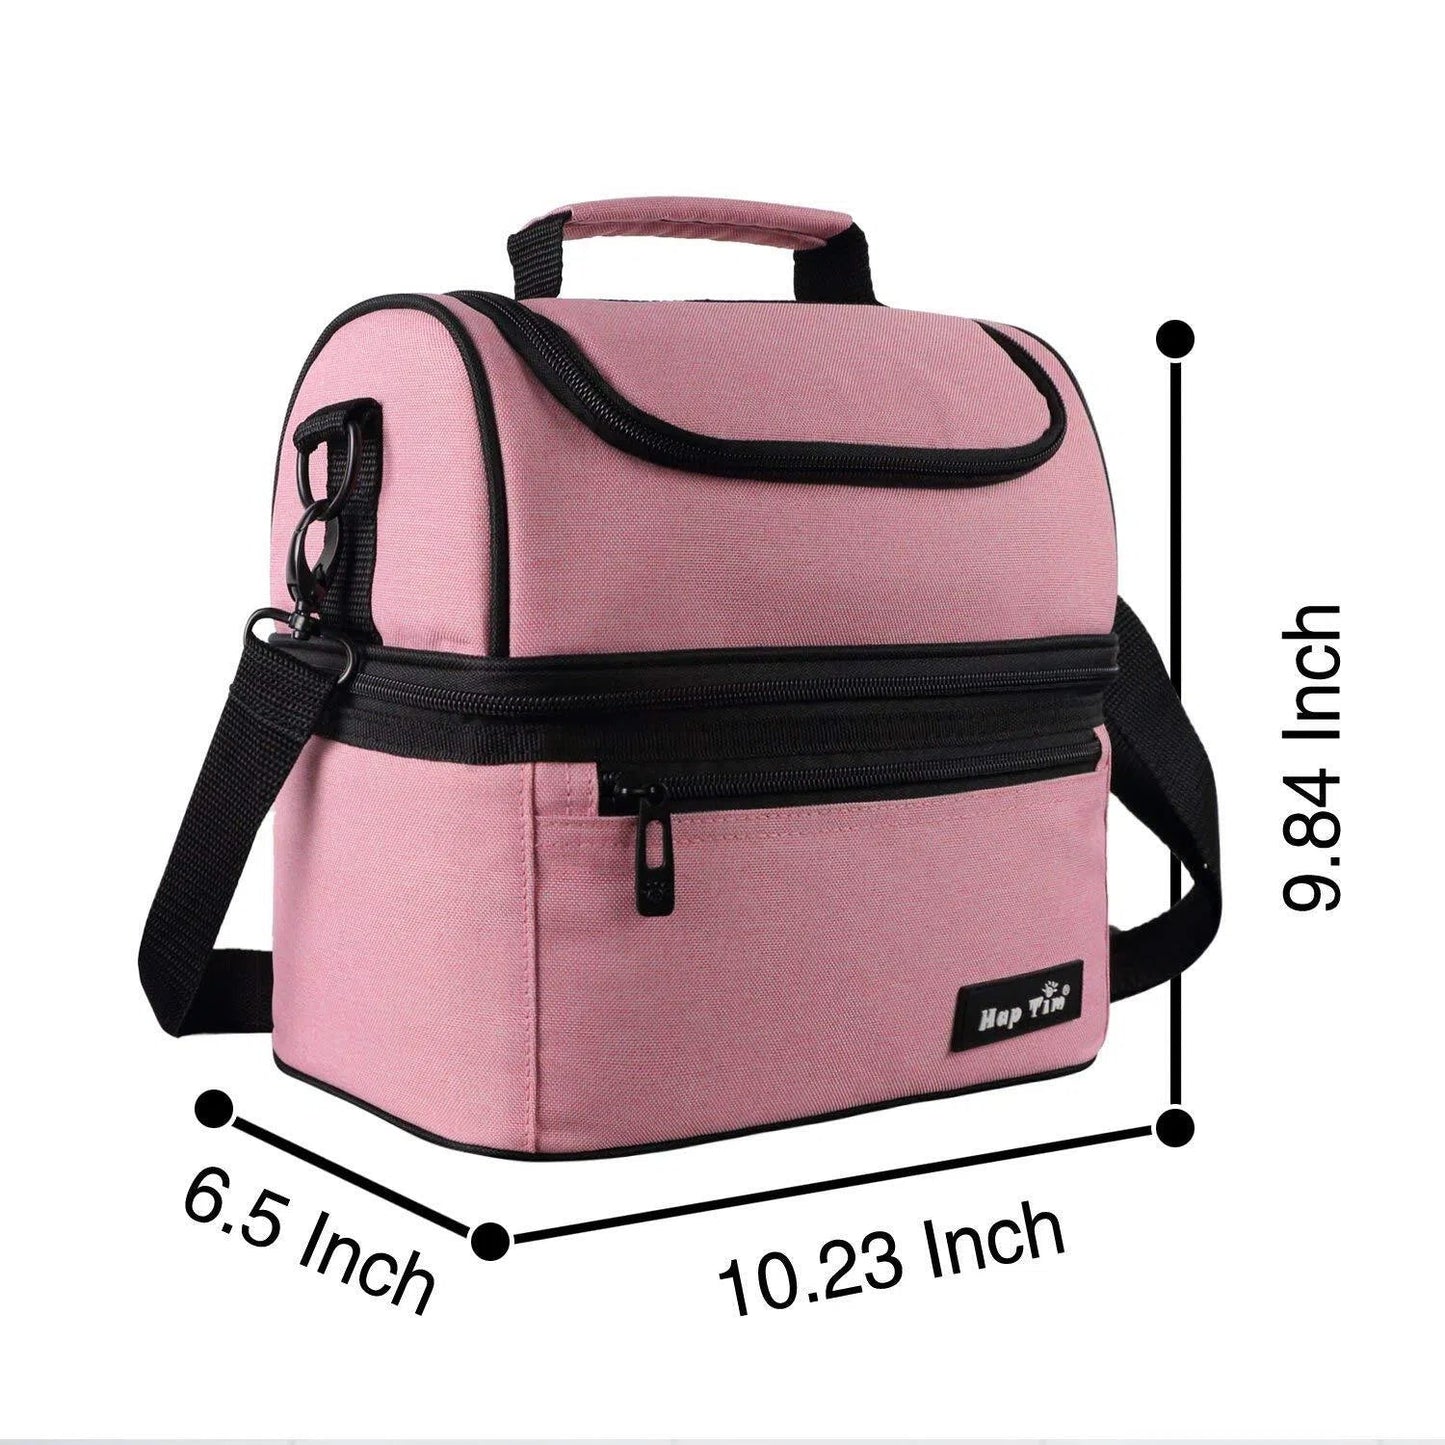 Hap Tim Lunch Box Insulated Lunch Bag Large Cooler Tote Bag (16040-PK)